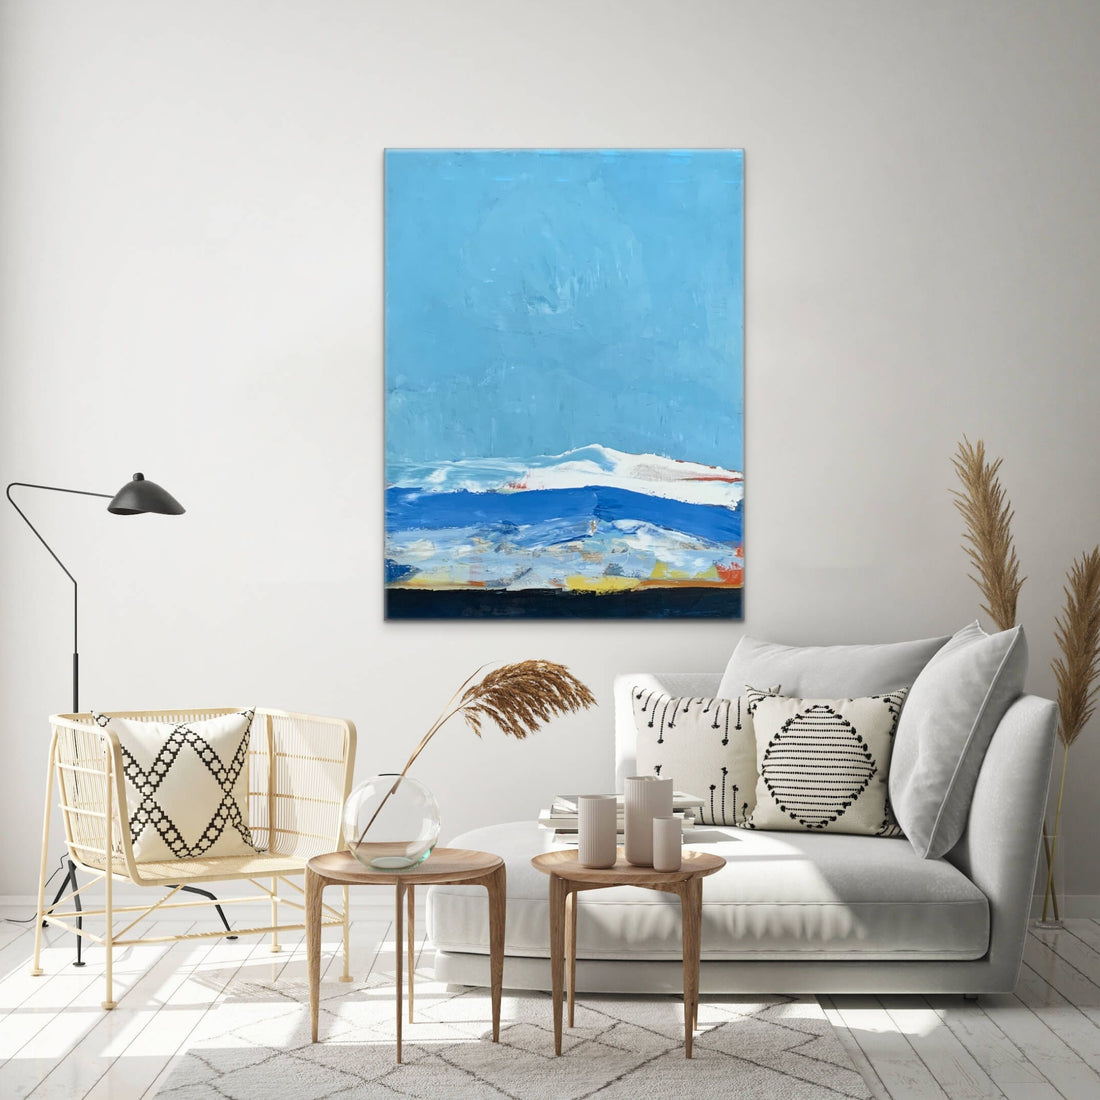 How to Buy Coastal Wall Decor - The Ultimate Guide